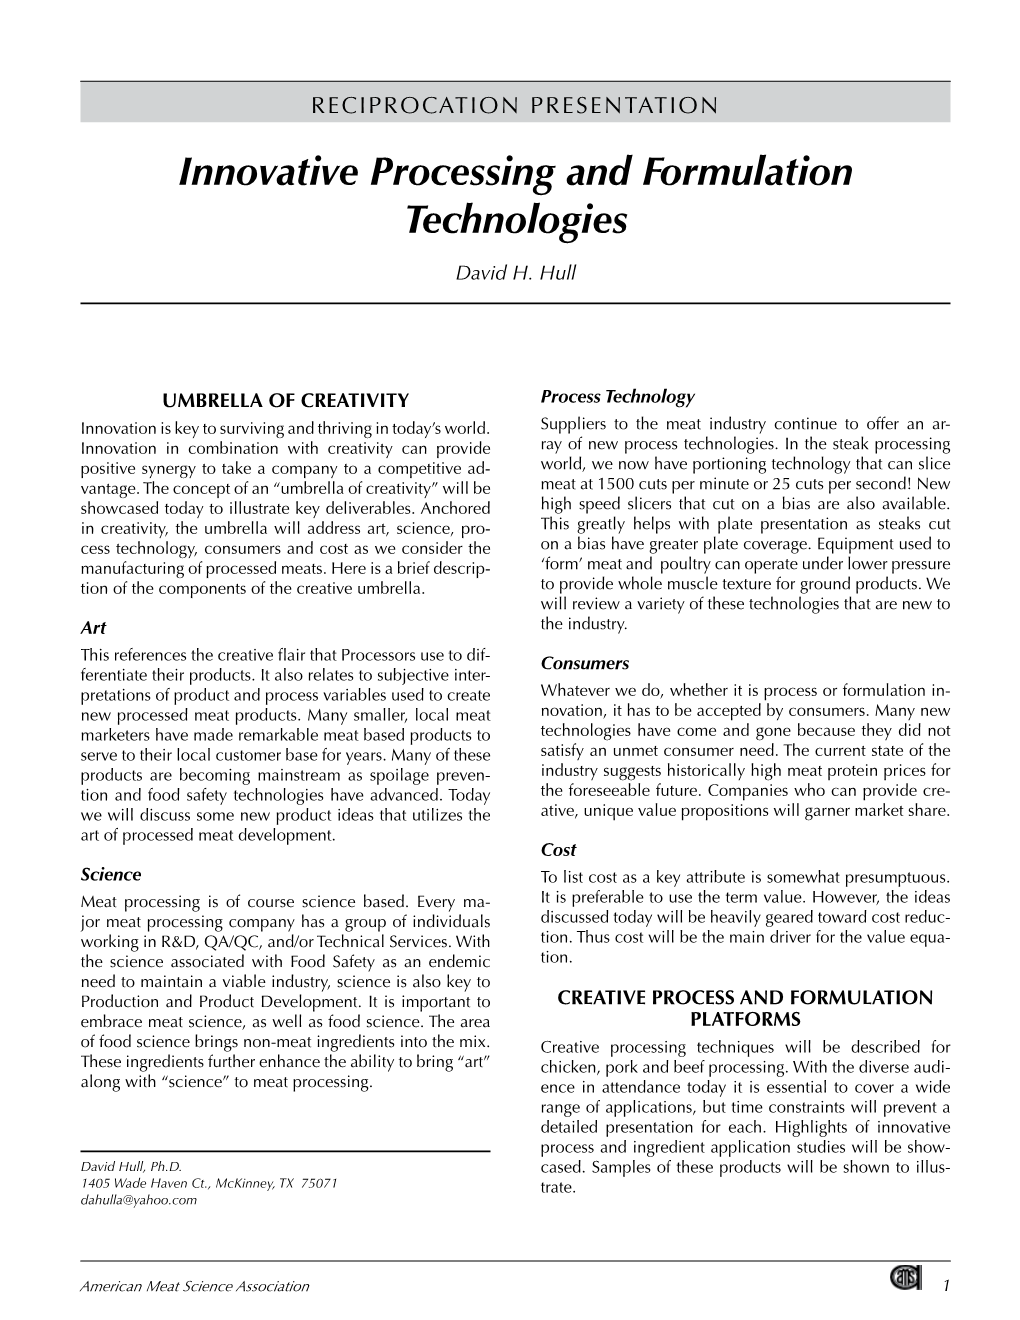 Innovative Processing and Formulation Technologies